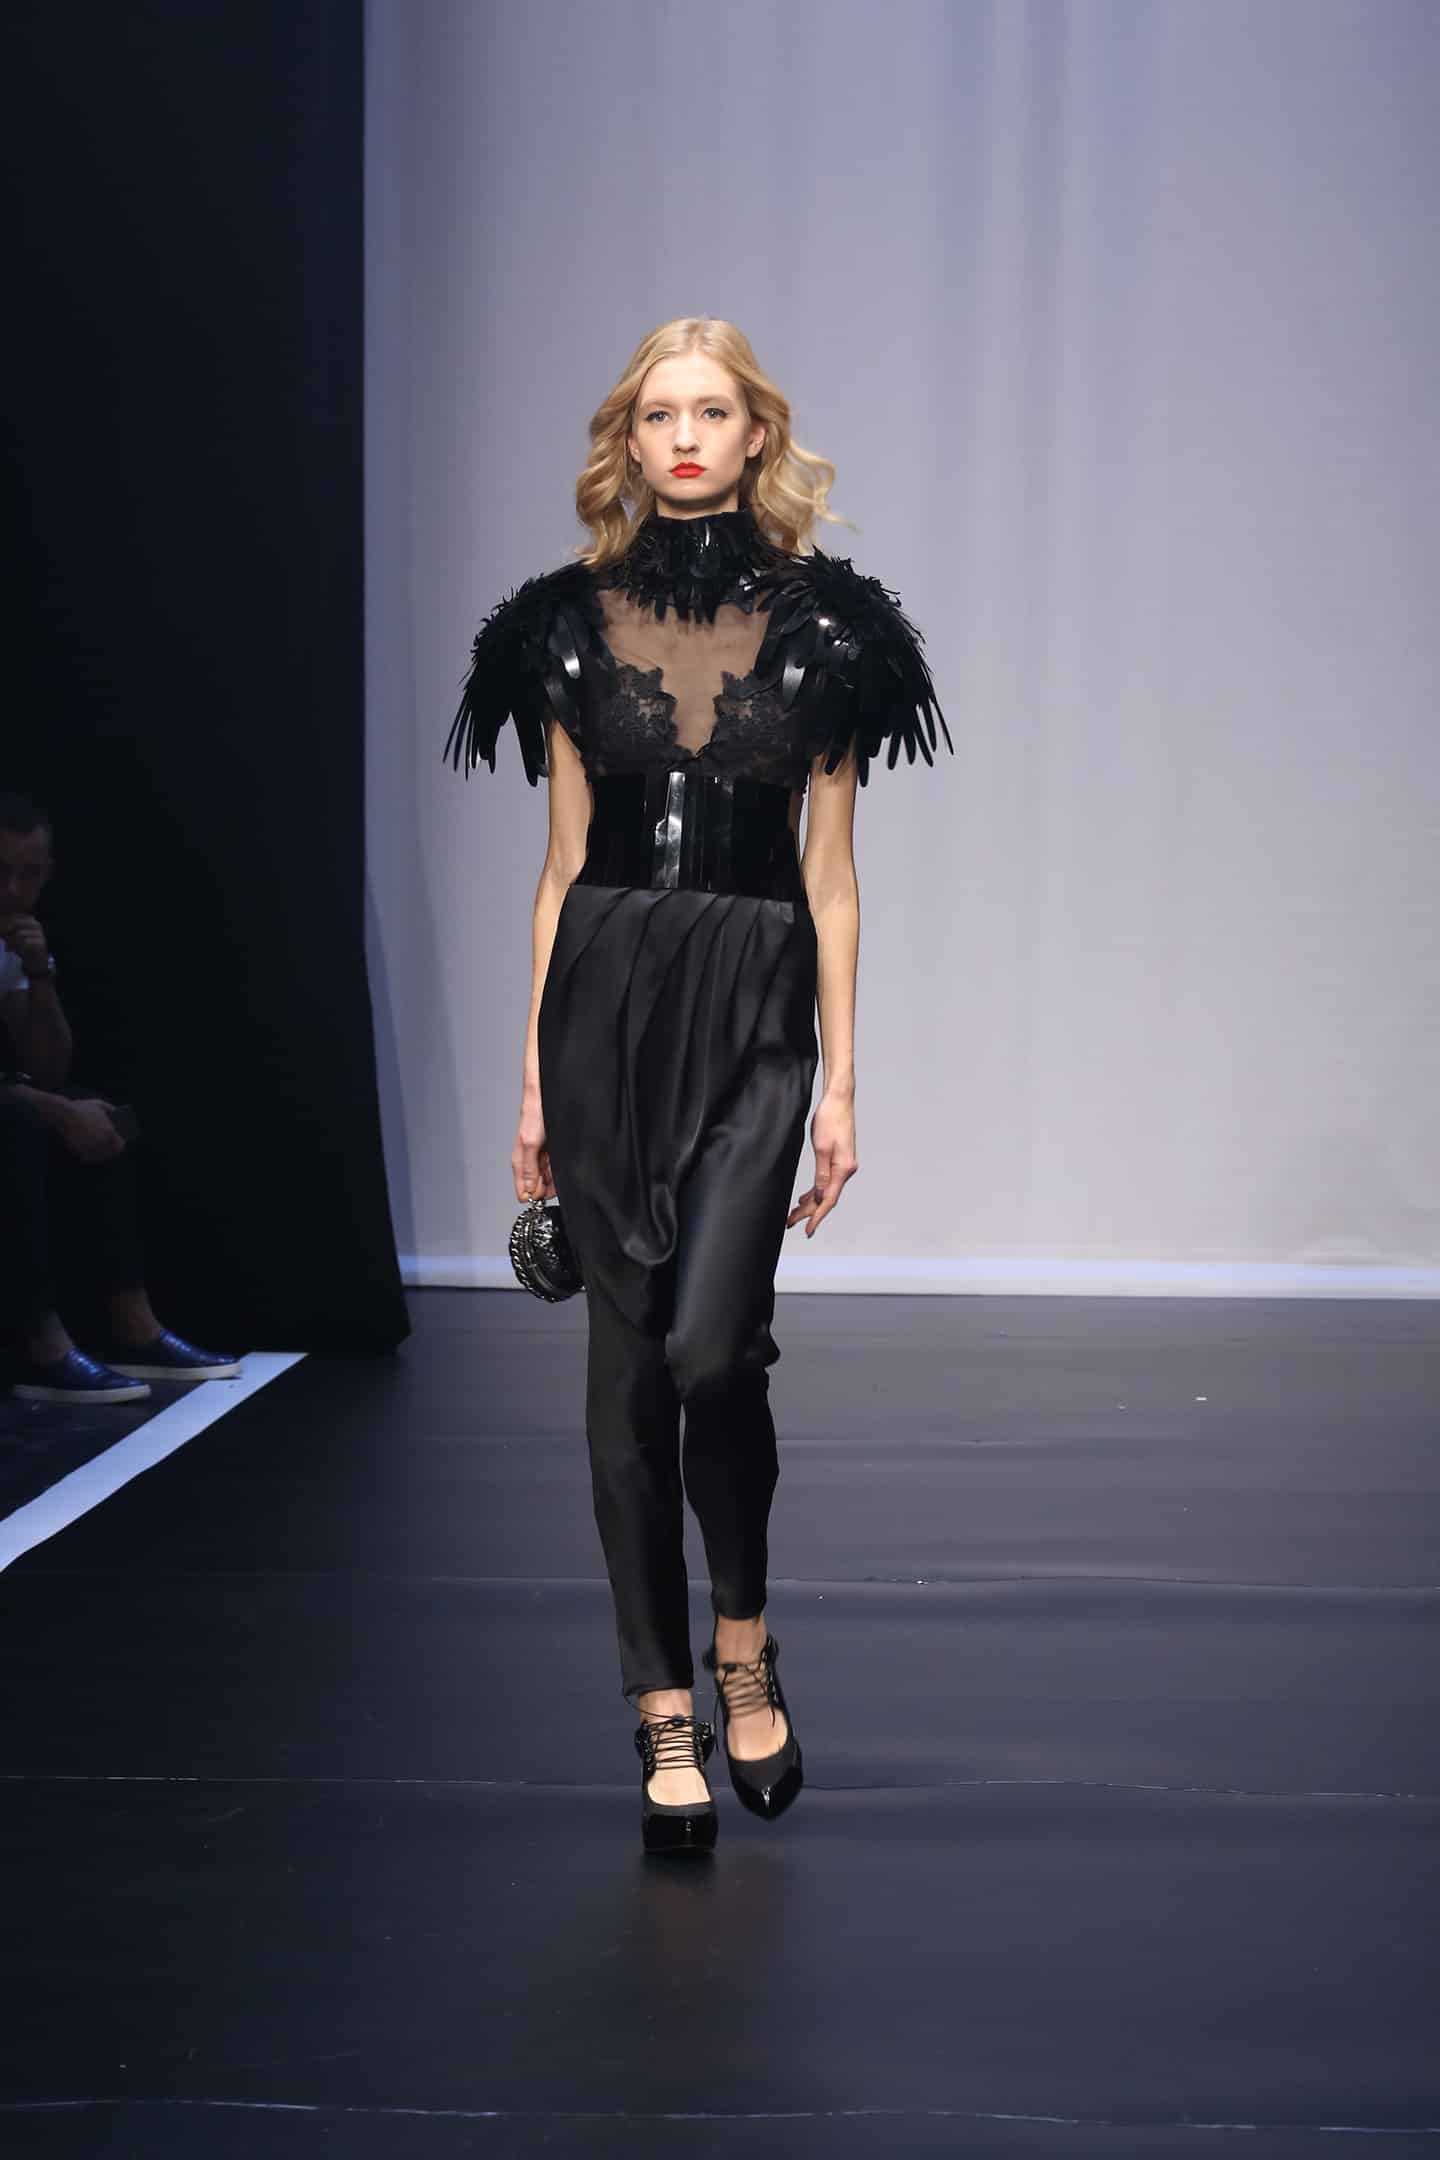 black top and pants couture by on aura tout vu in saint petersburg